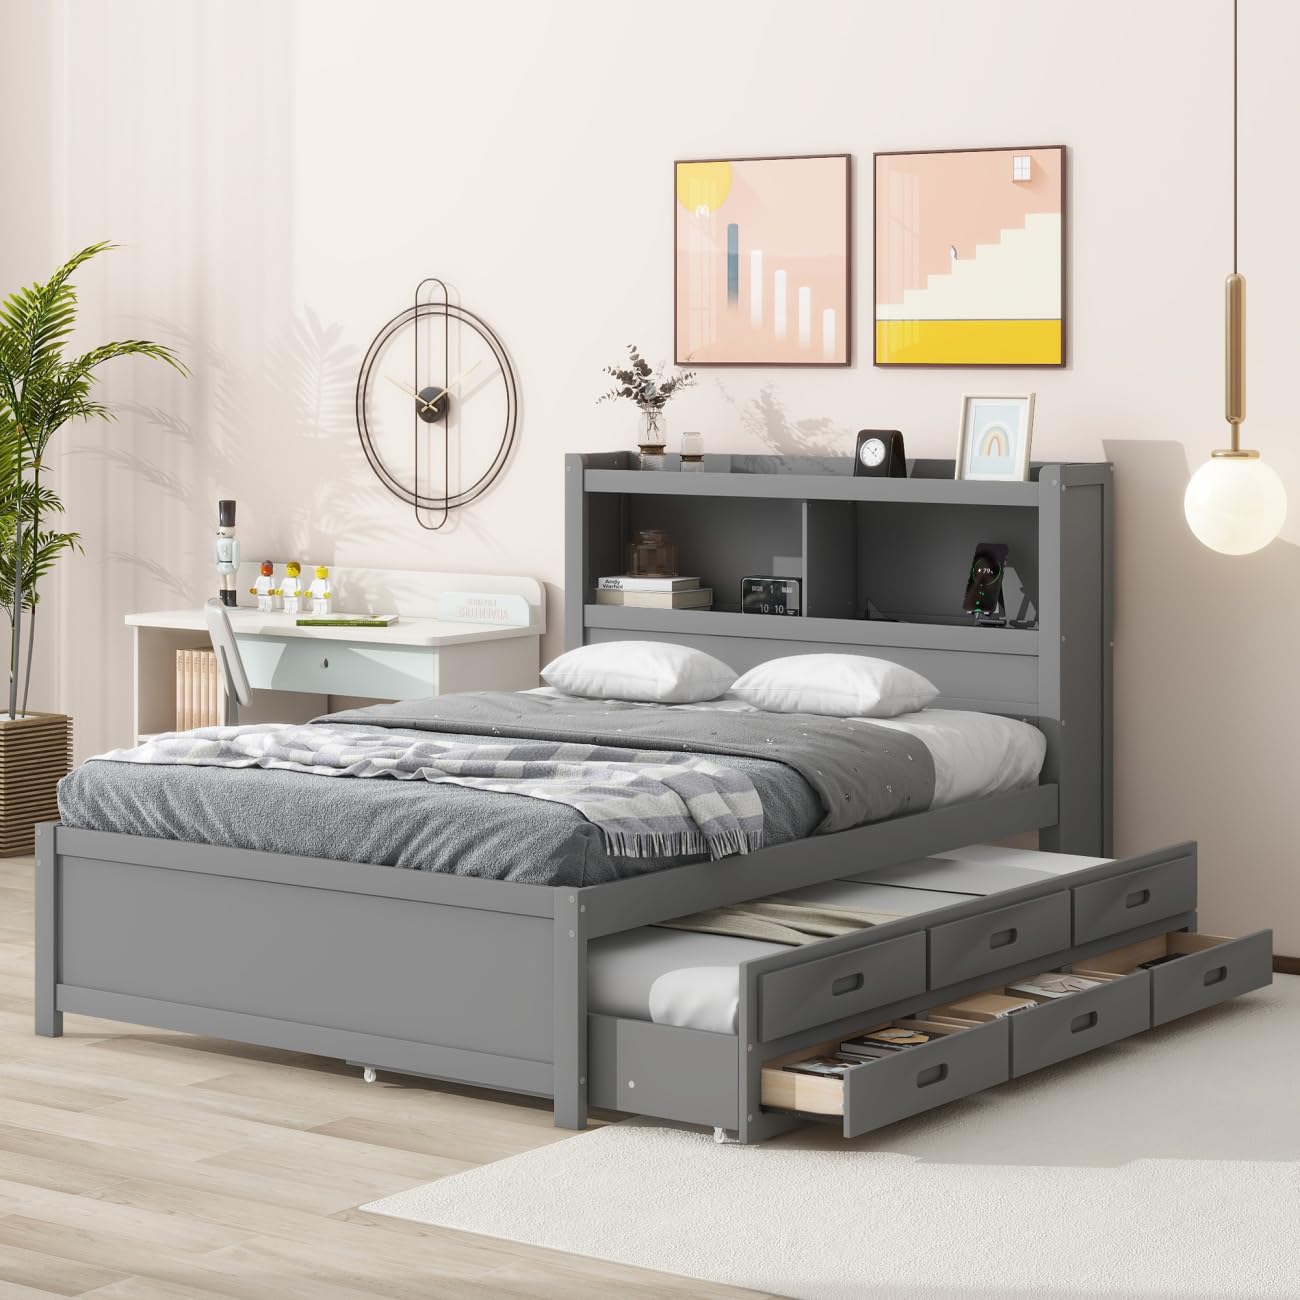 DNChuan Full Size Captain Bed with Trundle and Drawers,Platform Bed with Bookcase Headboard and USB Plugs,Solid Pine Frame-Gray